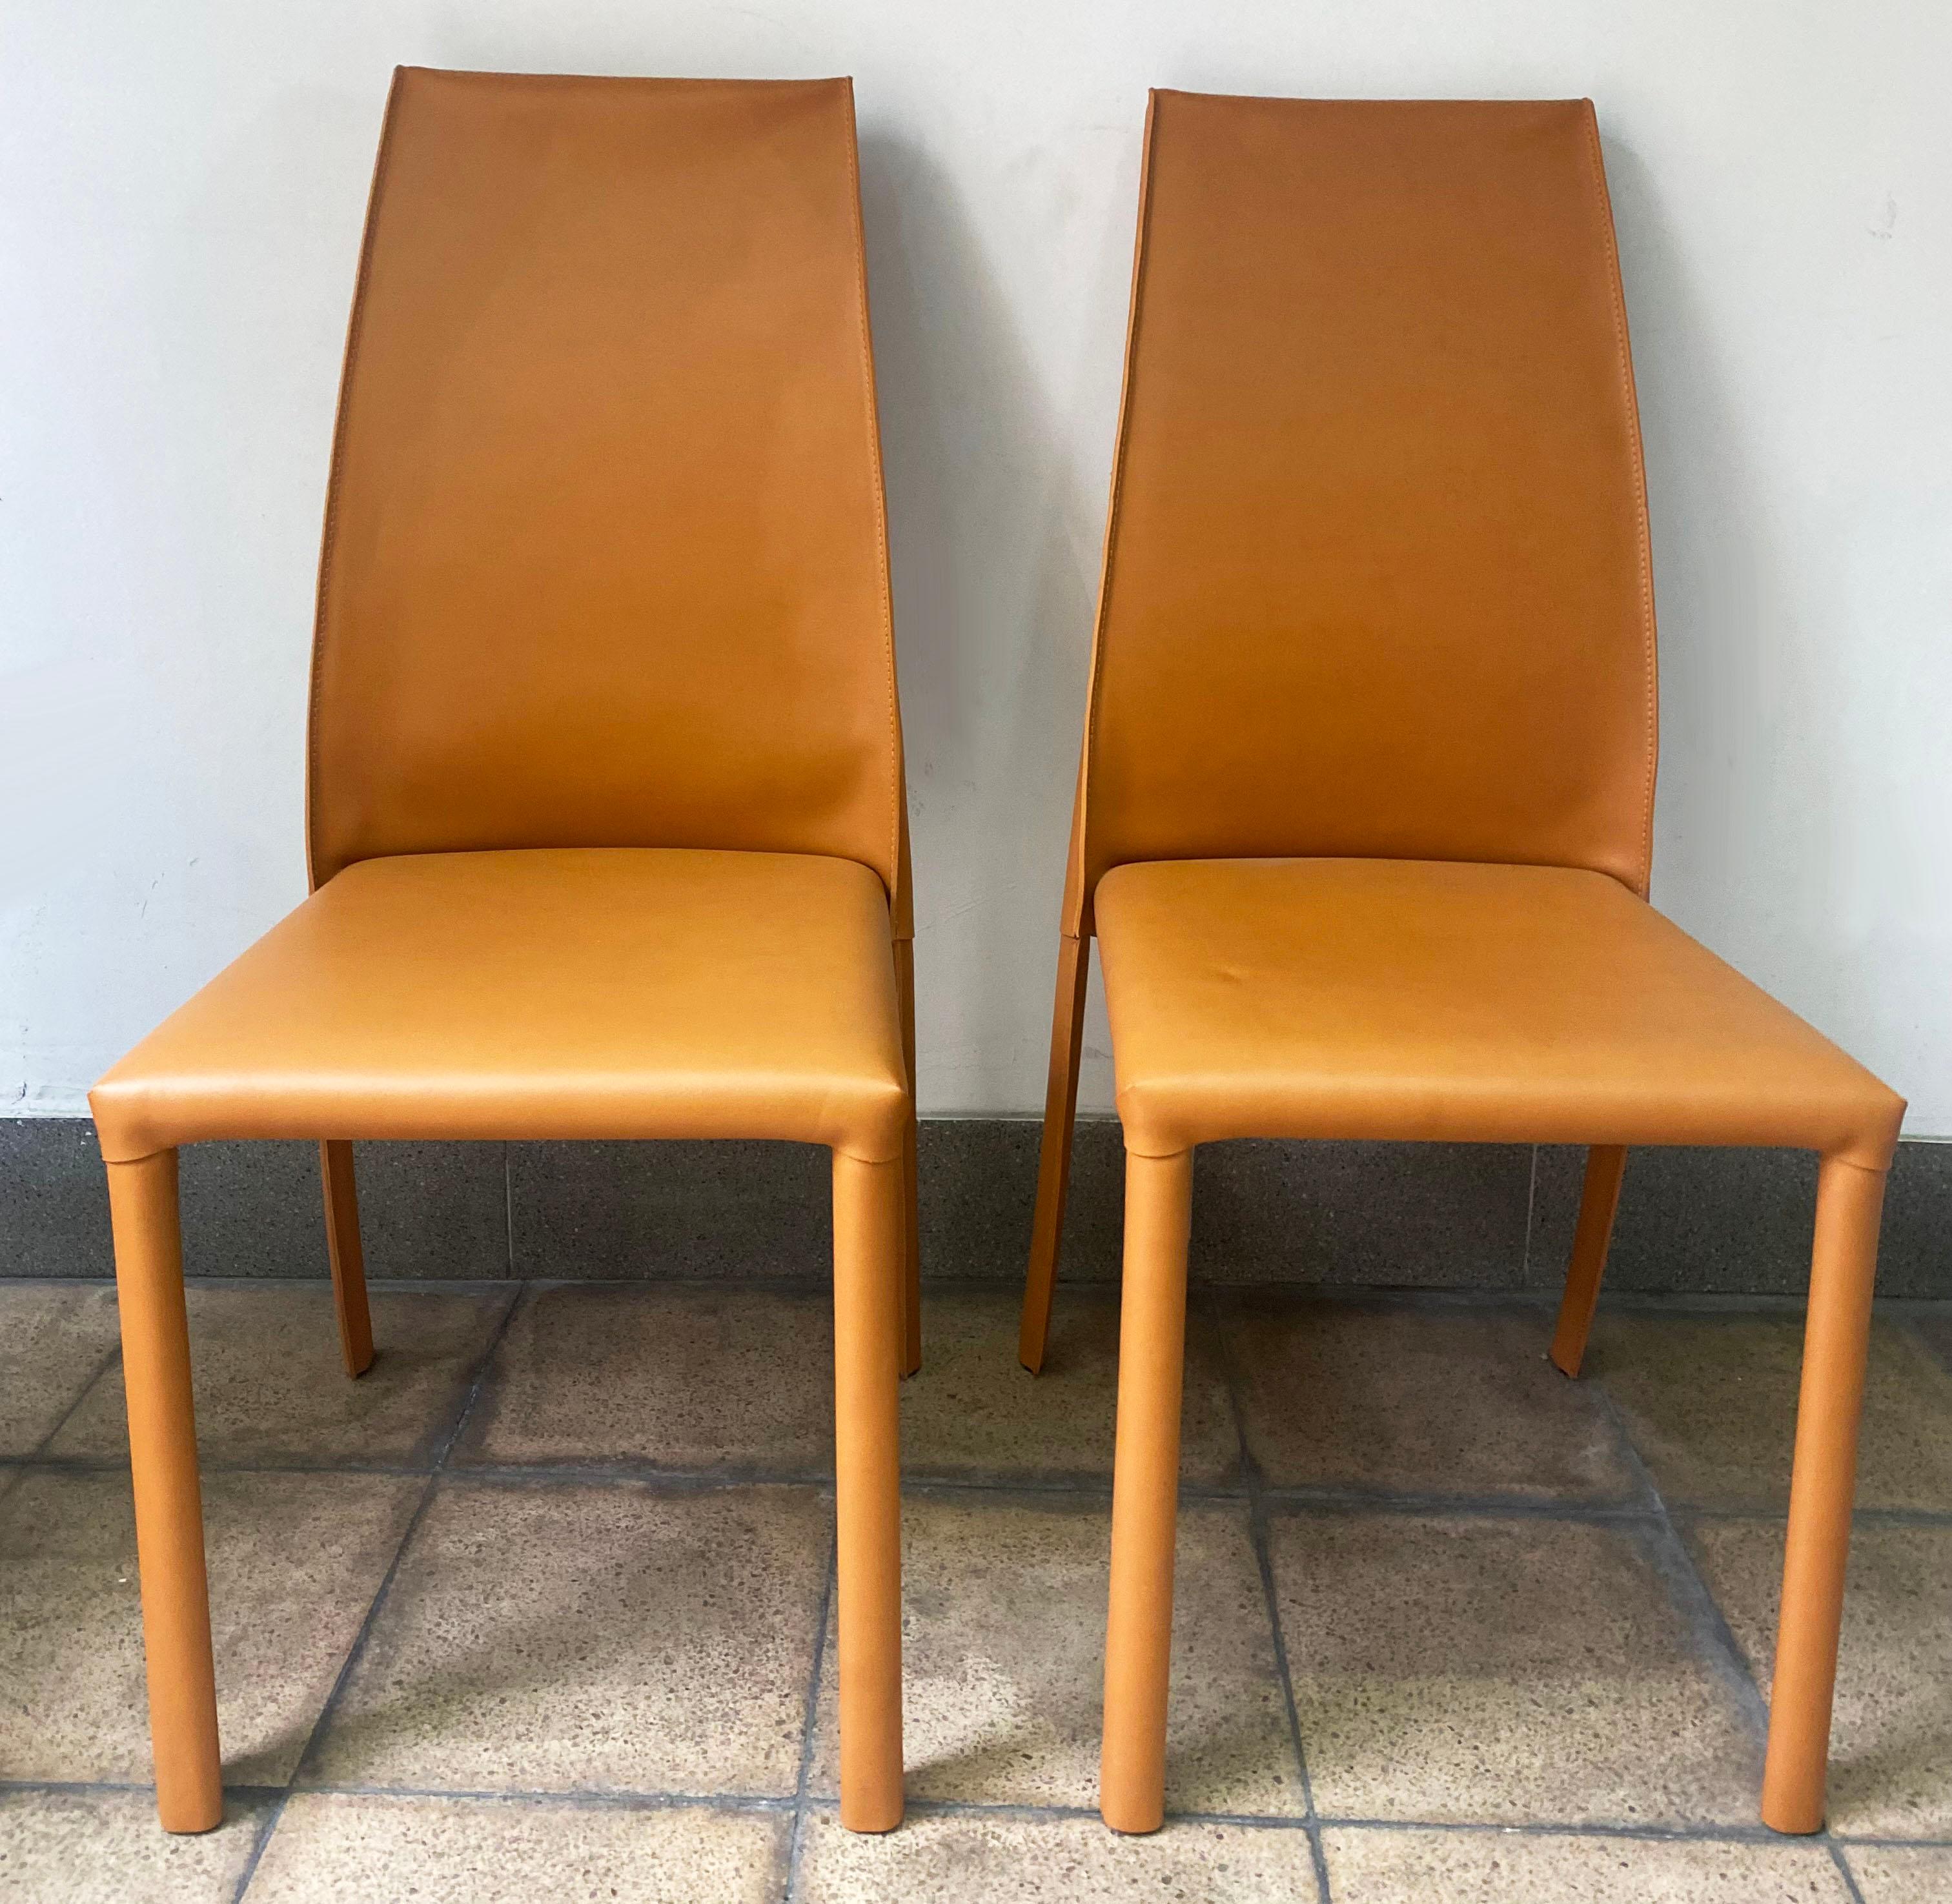 Poltrona Frau - Pair of Frag chairs 
Fawn leather 
Handmade in Italy 
Signed 
Dimensions: h103 x w42 cm x d42 cm

Price per pair 800€.